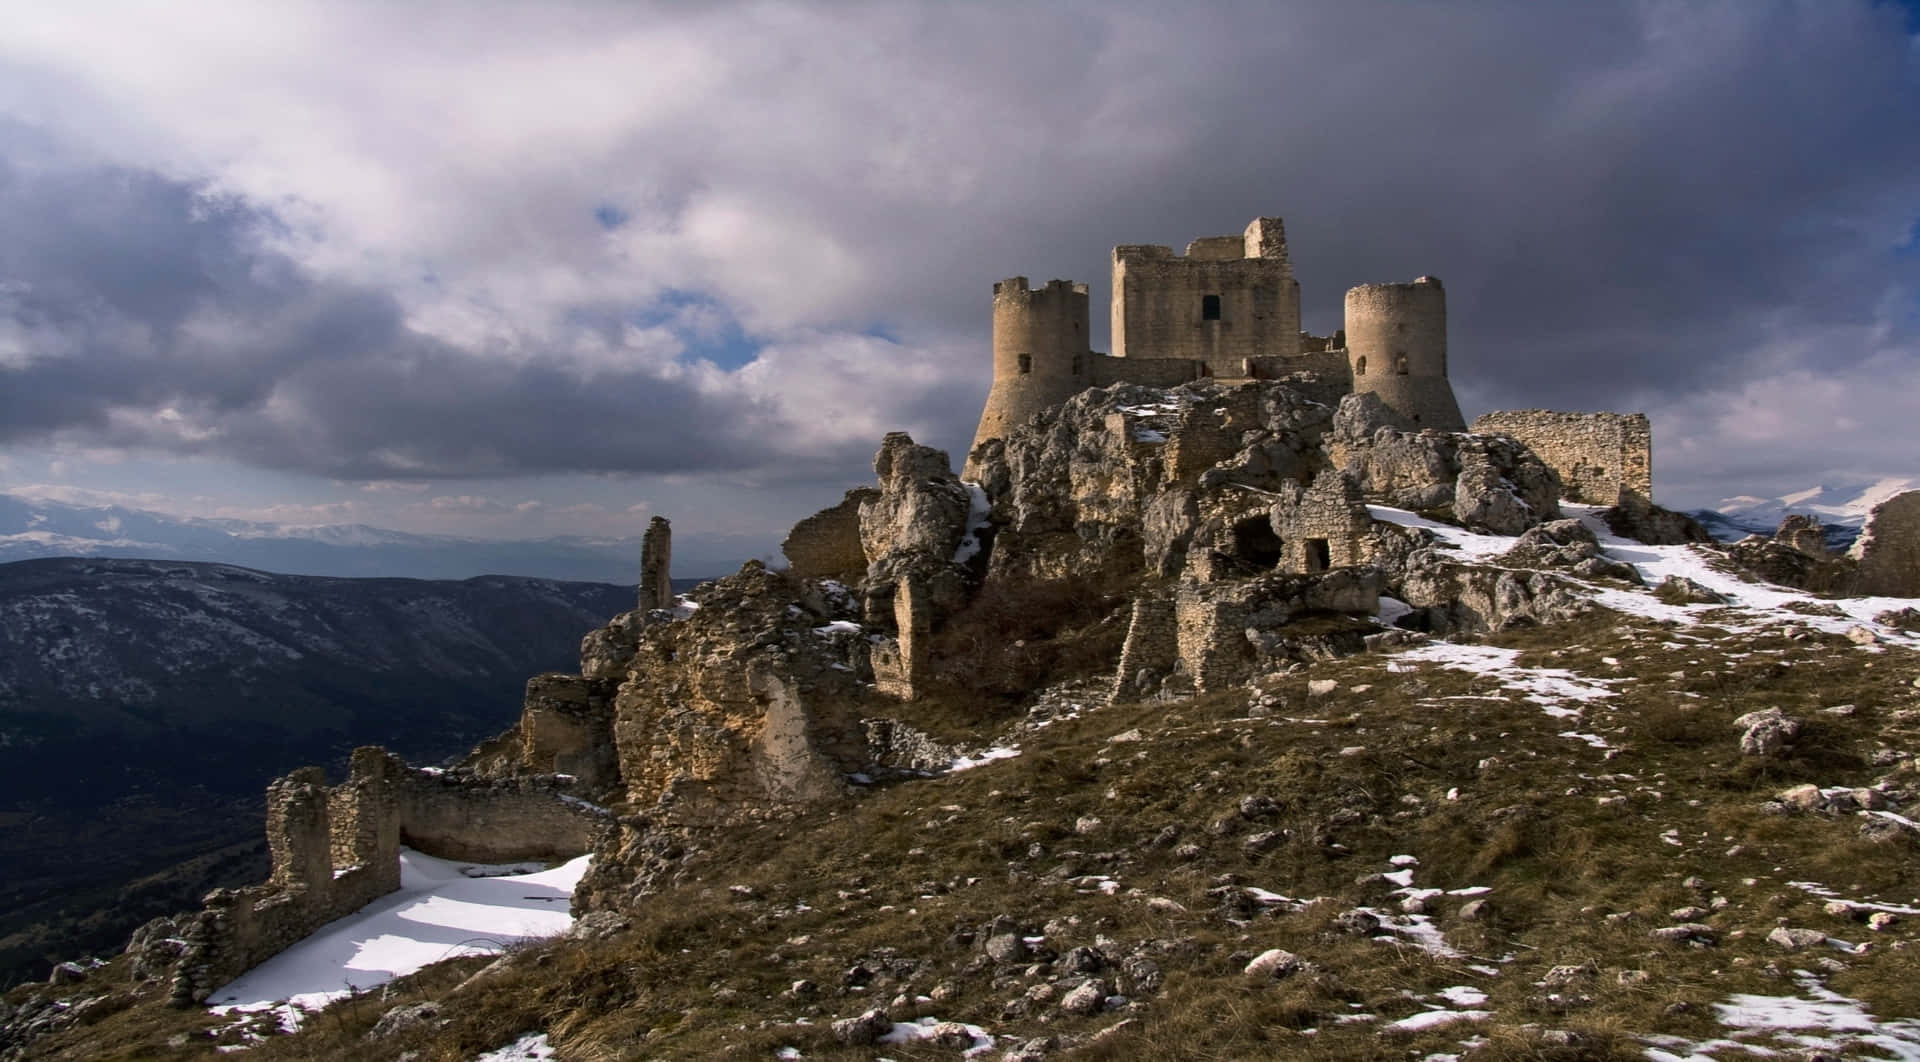 Exploring the Medieval Architecture of a European Castle